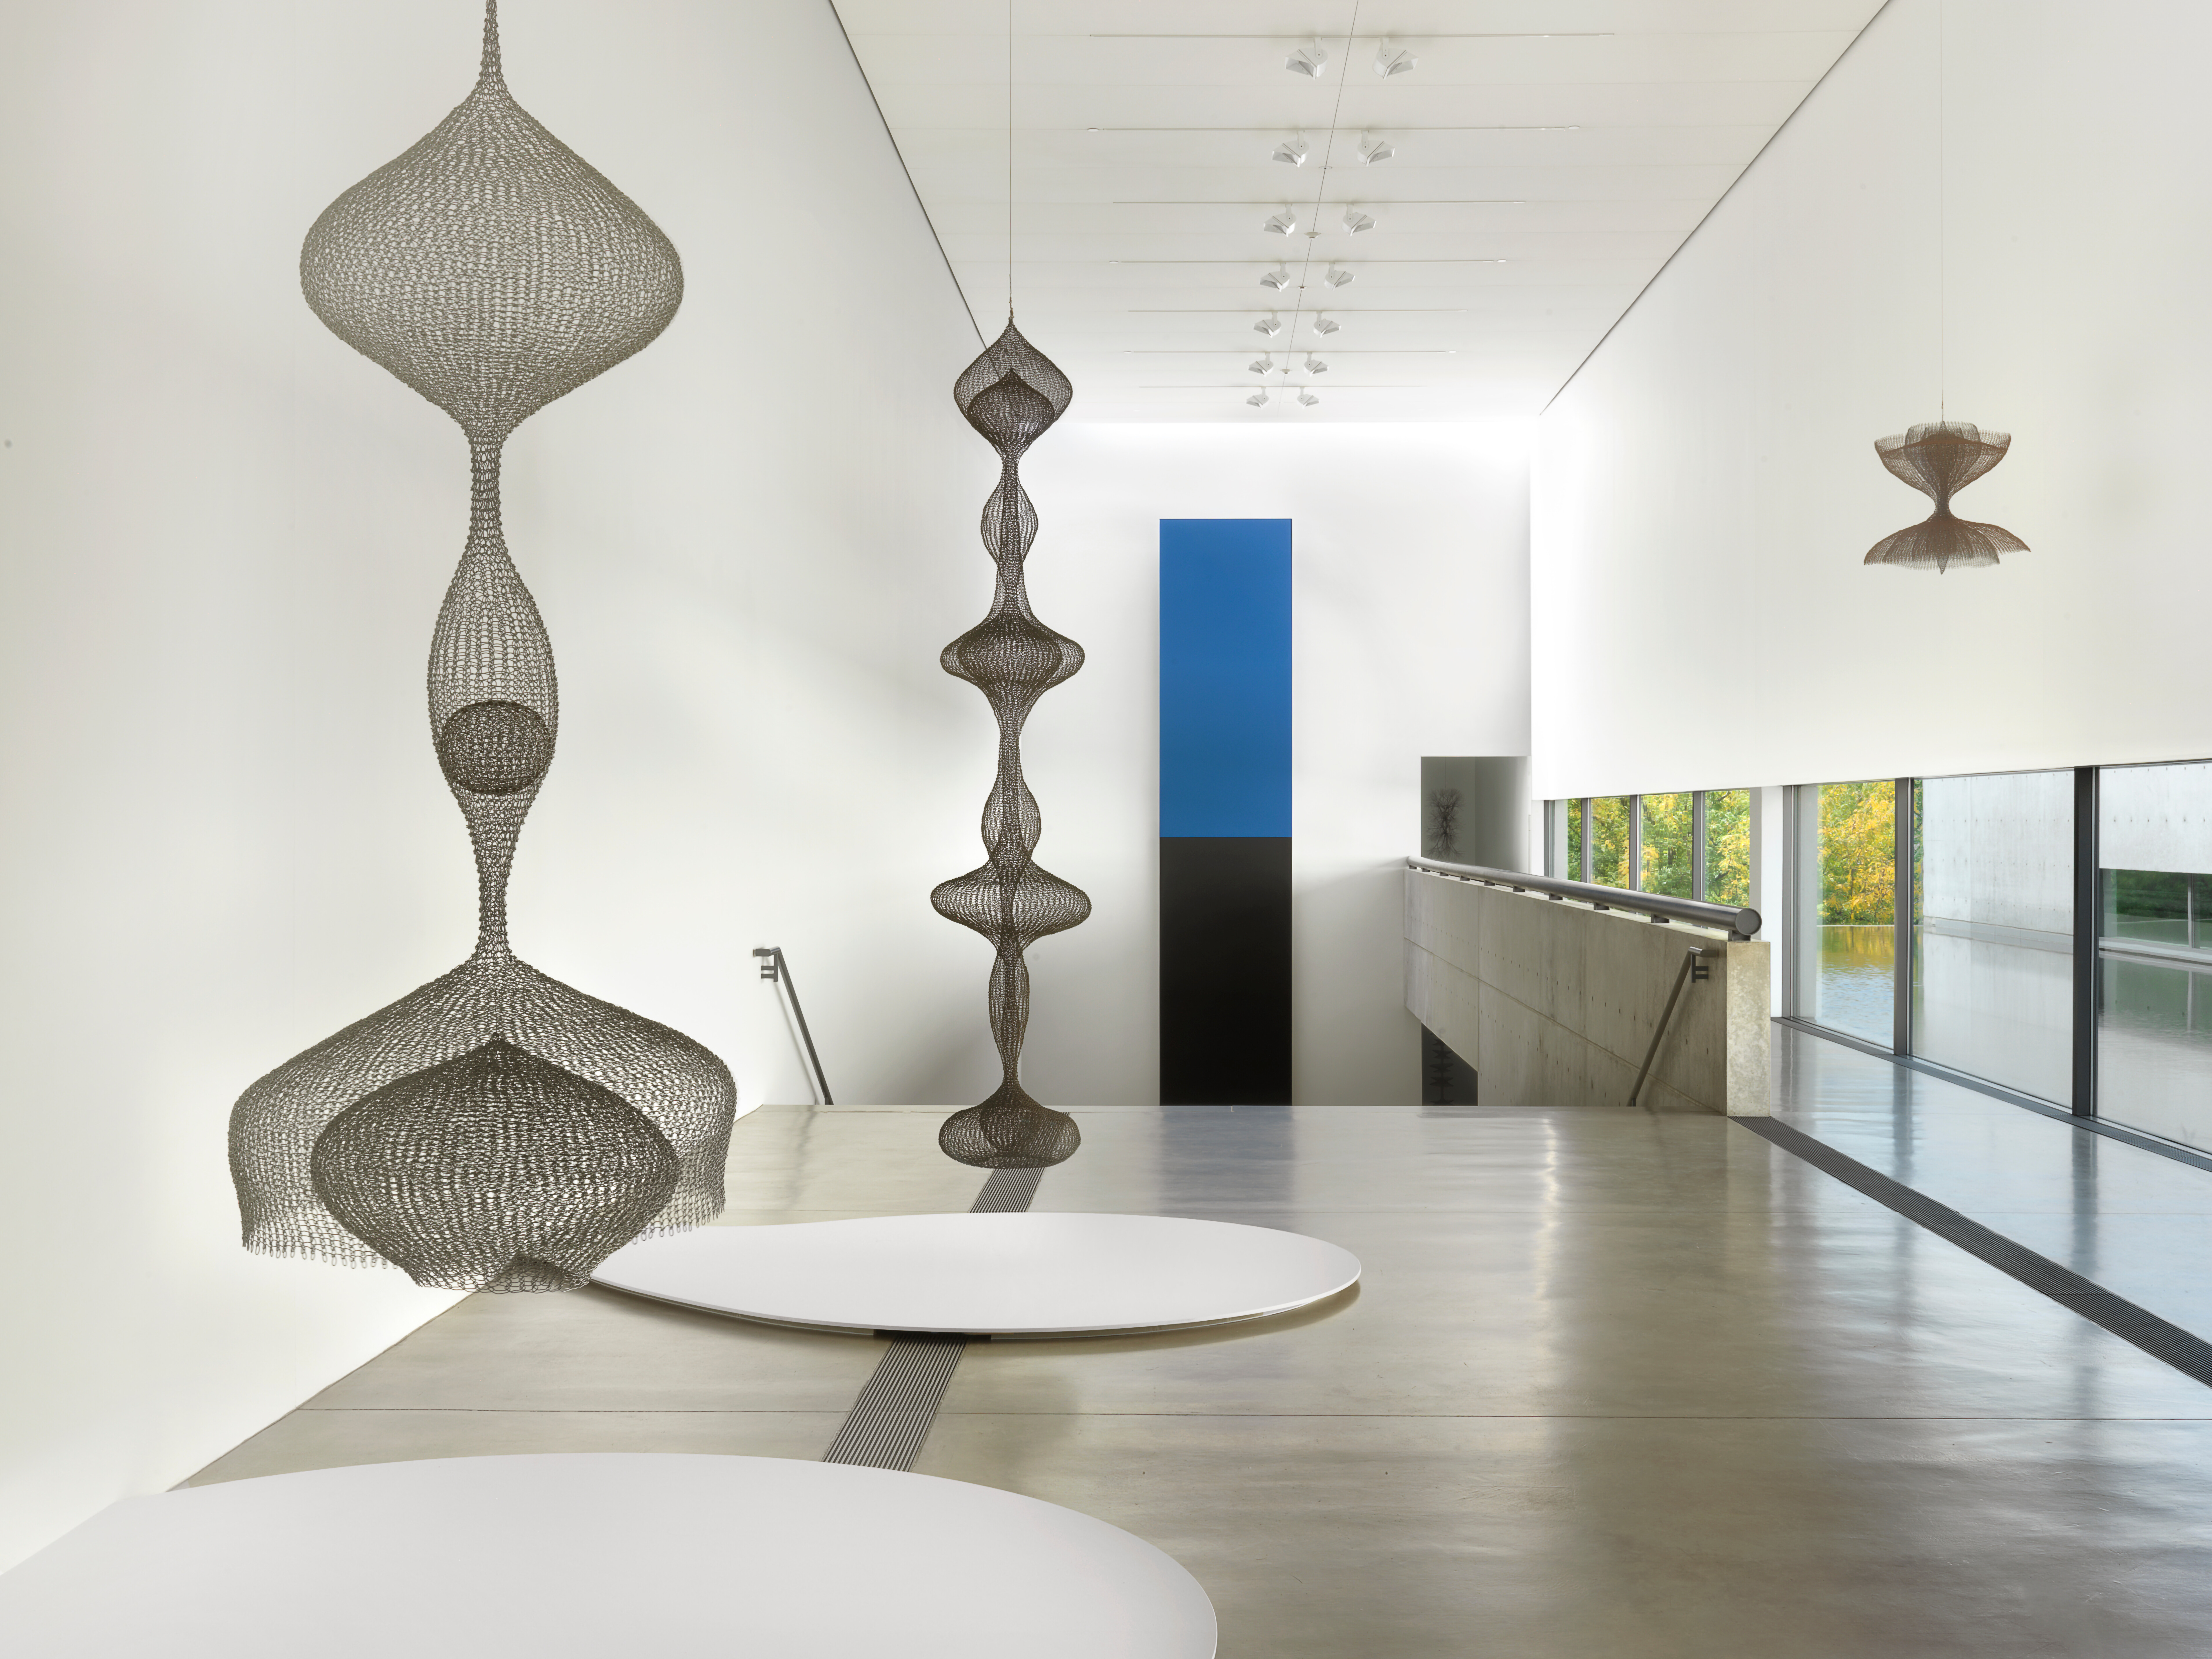 Installation view of the exhibition, Ruth Asawa: Life’s Work, at the Pulitzer Arts Foundation in St. Louis, dated 2018.